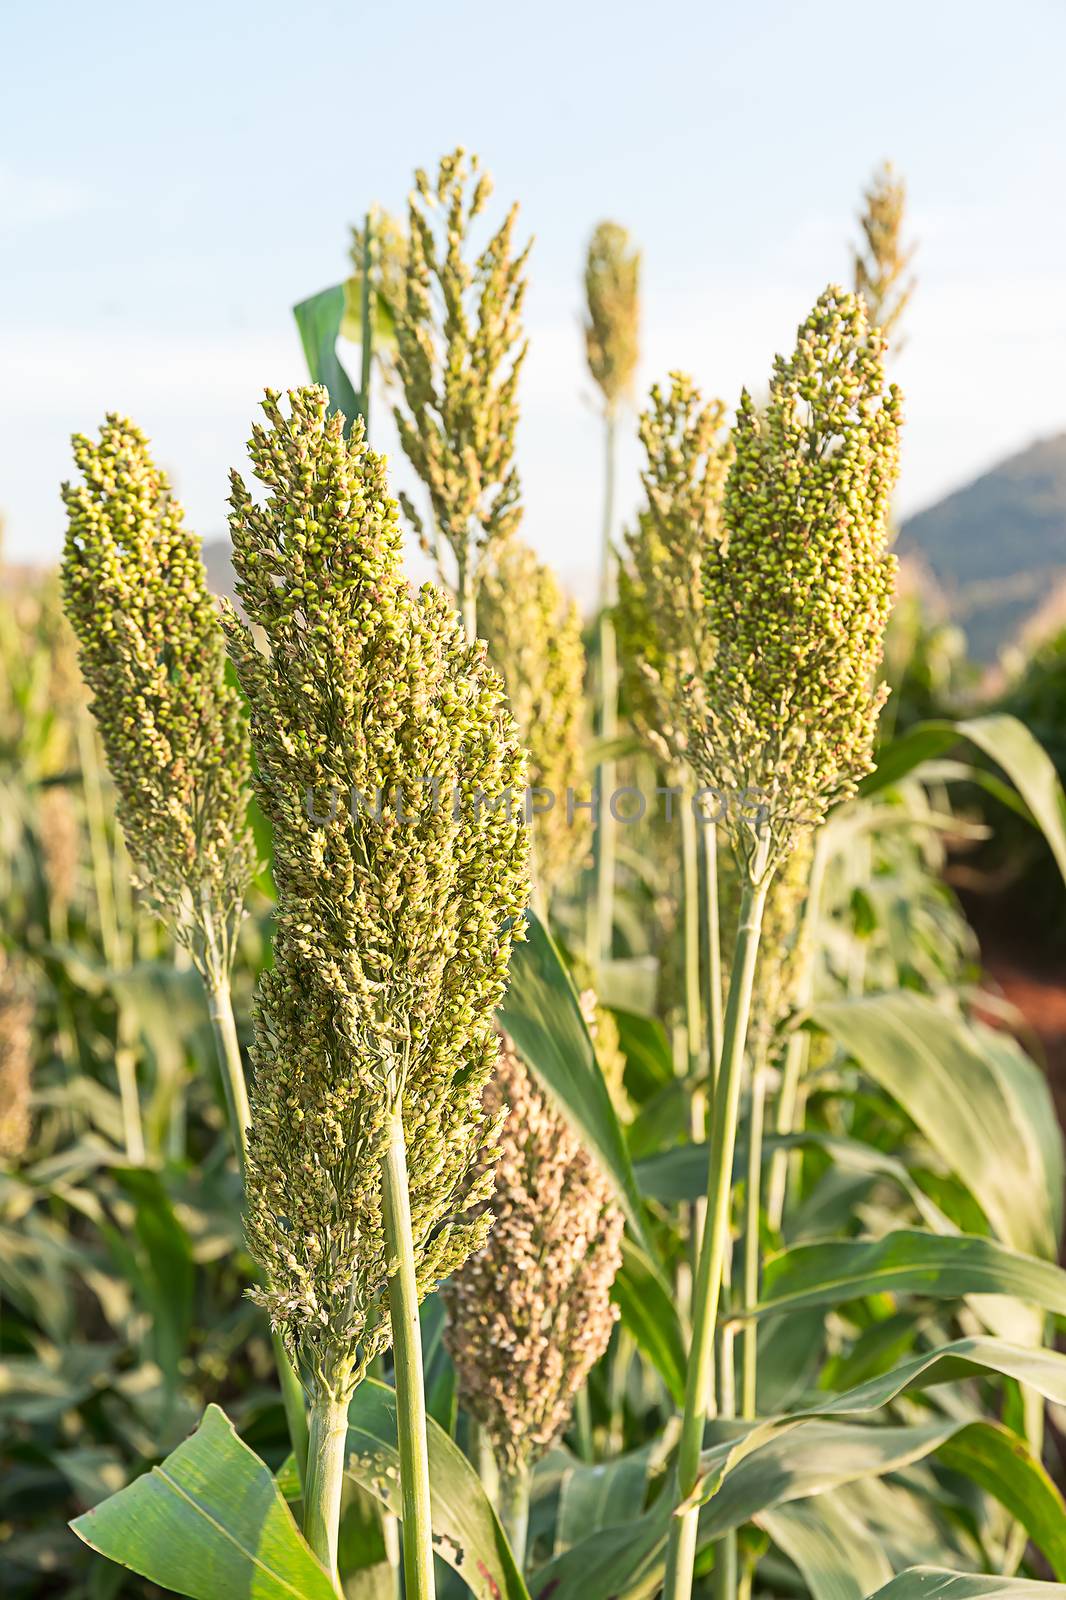 Close up field of Sorghum or Millet an important cereal crop